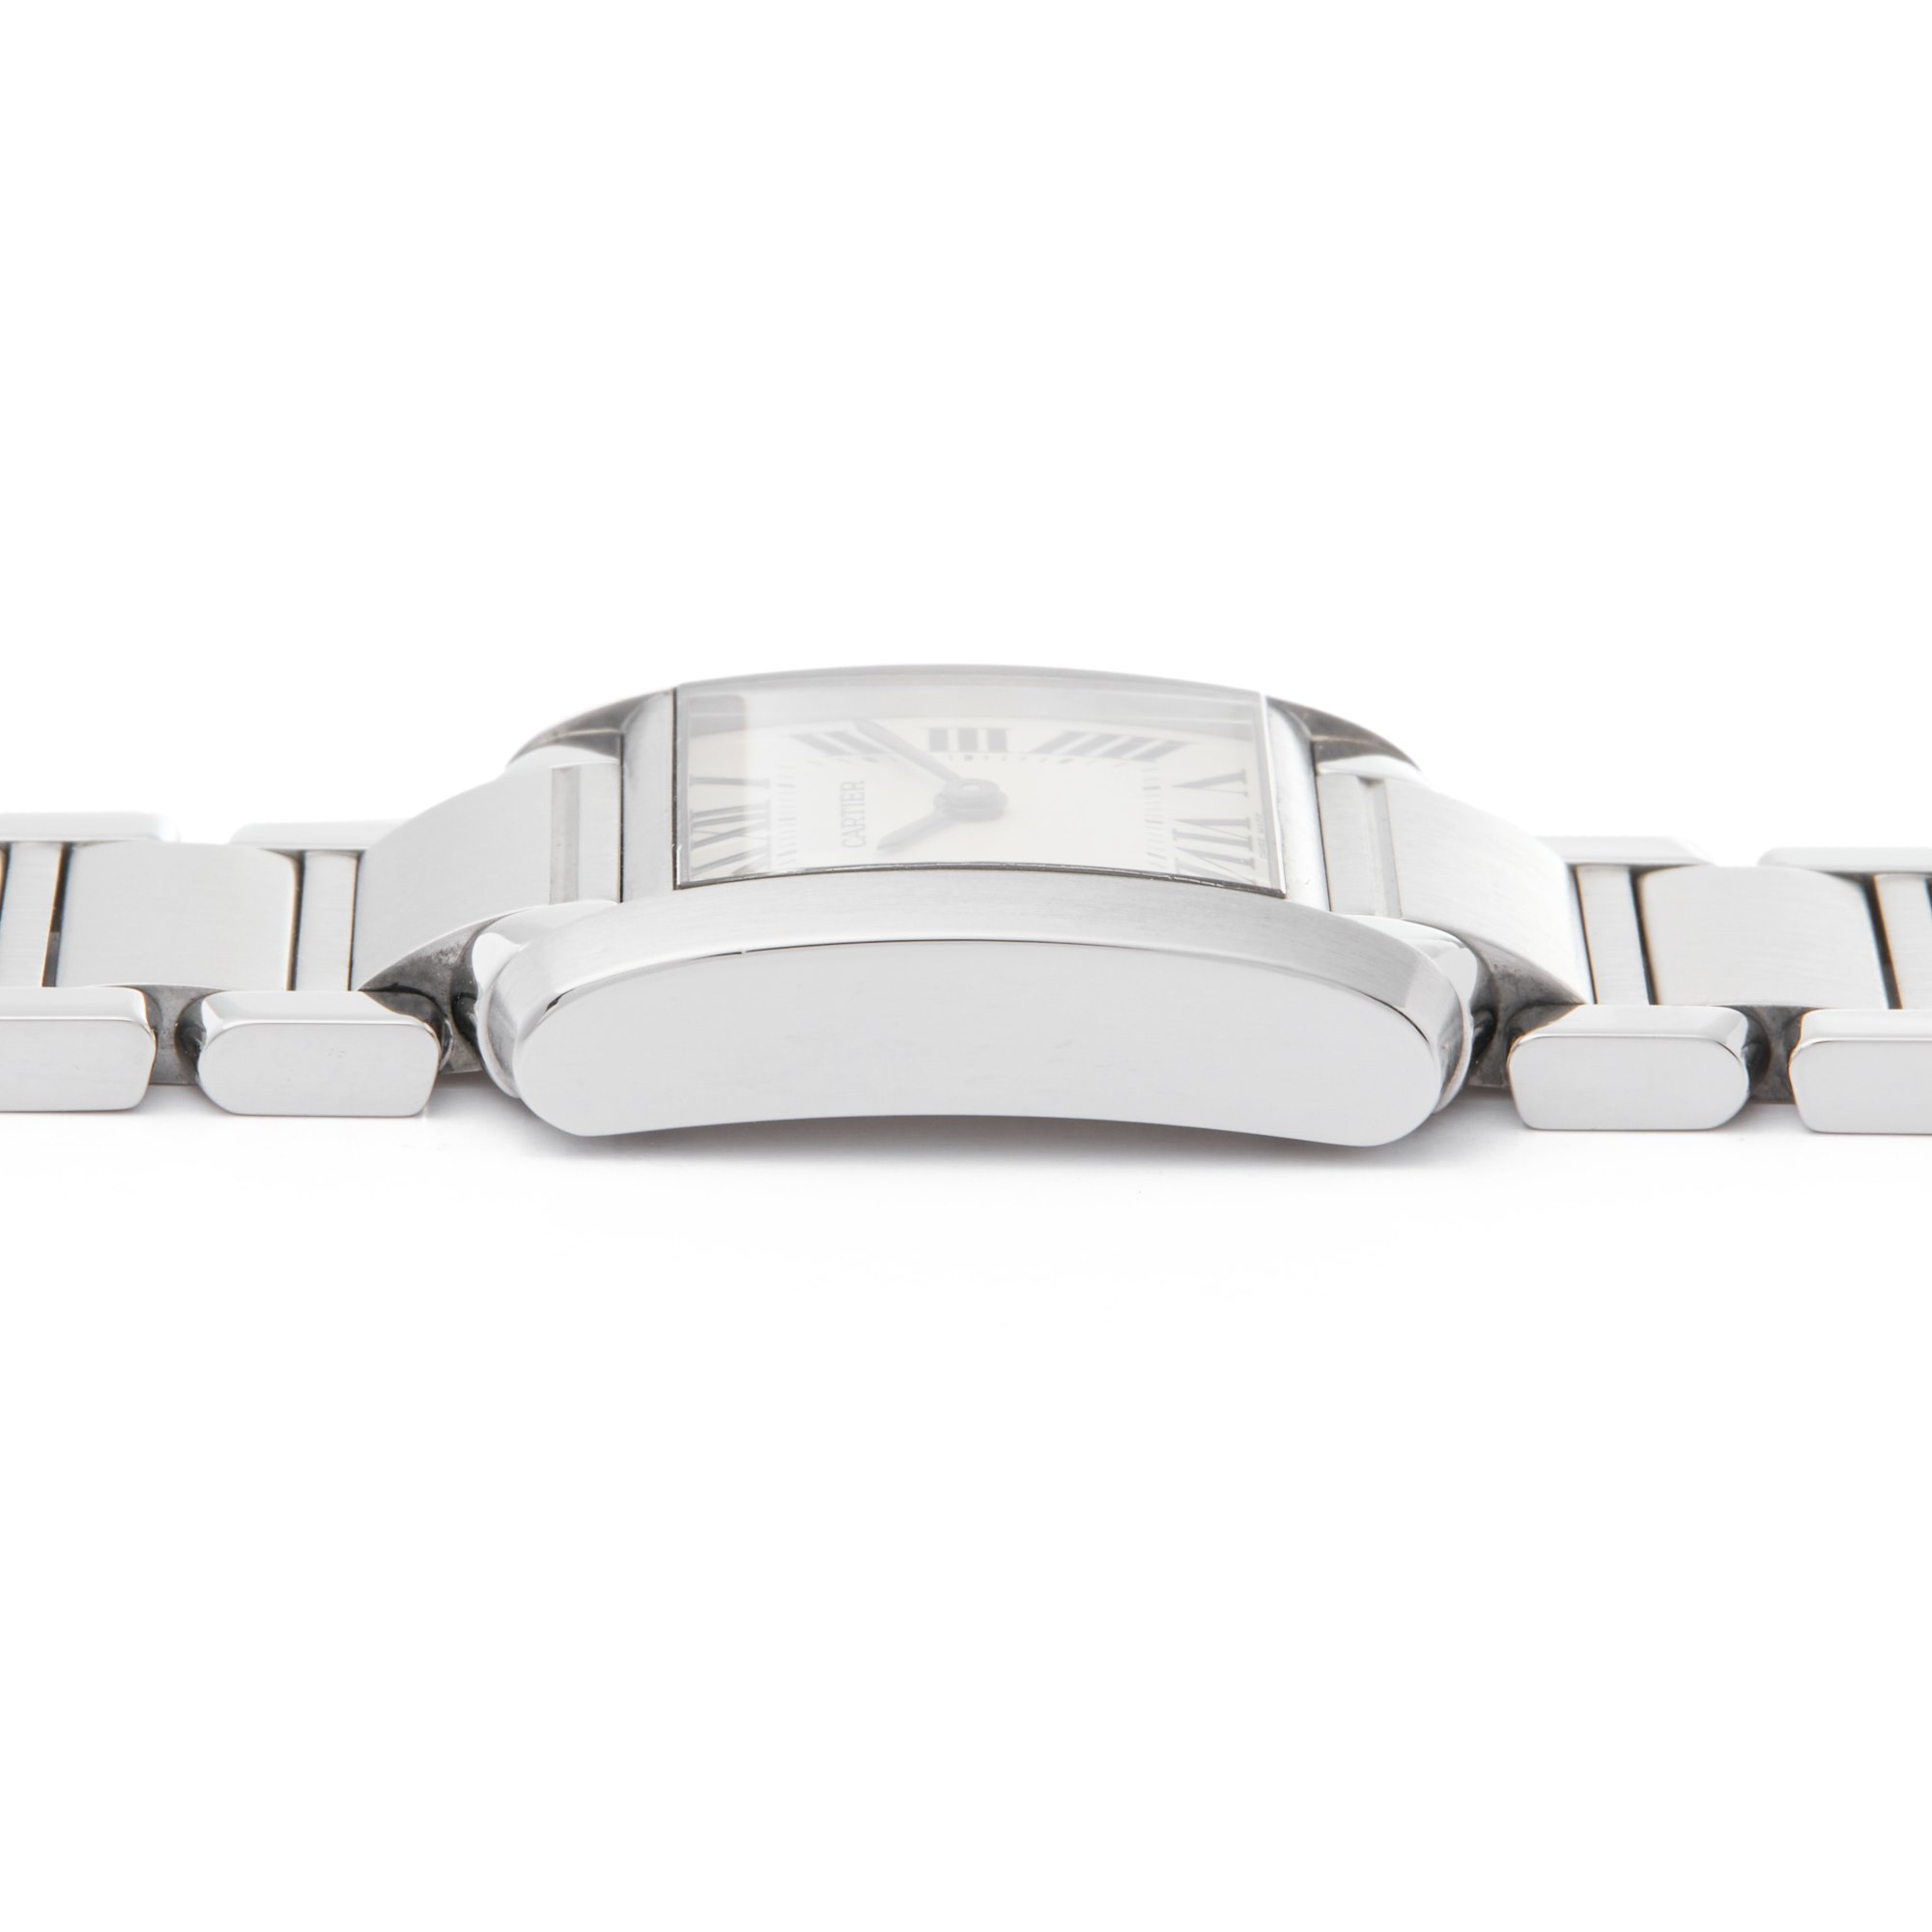 Cartier Tank Francaise Stainless Steel 3217